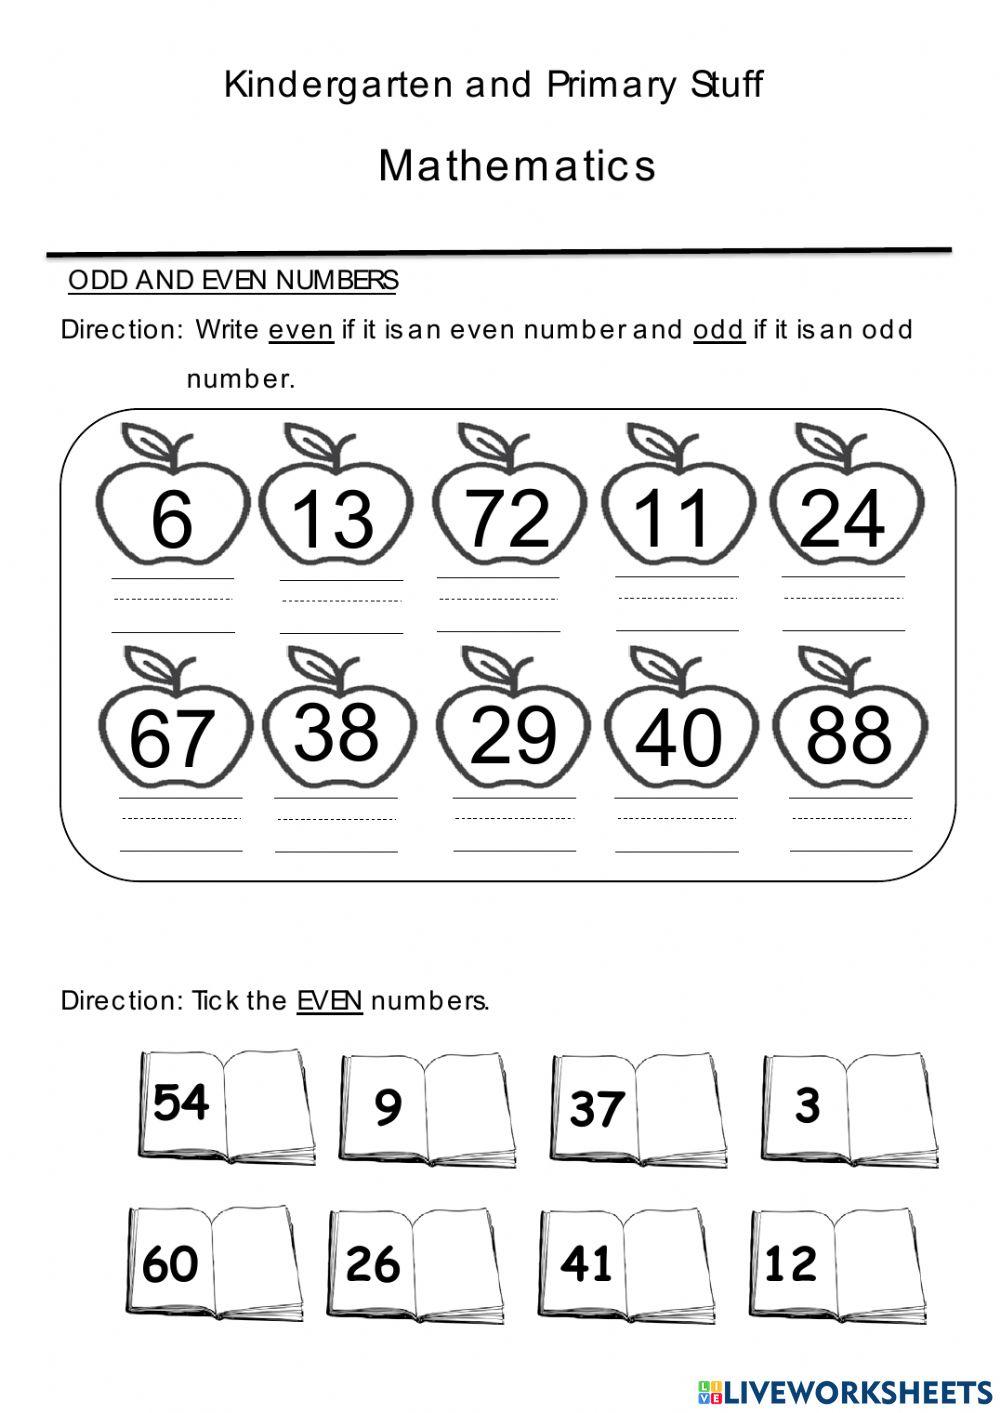 Odd and Even Numbers & Expanding Numbers